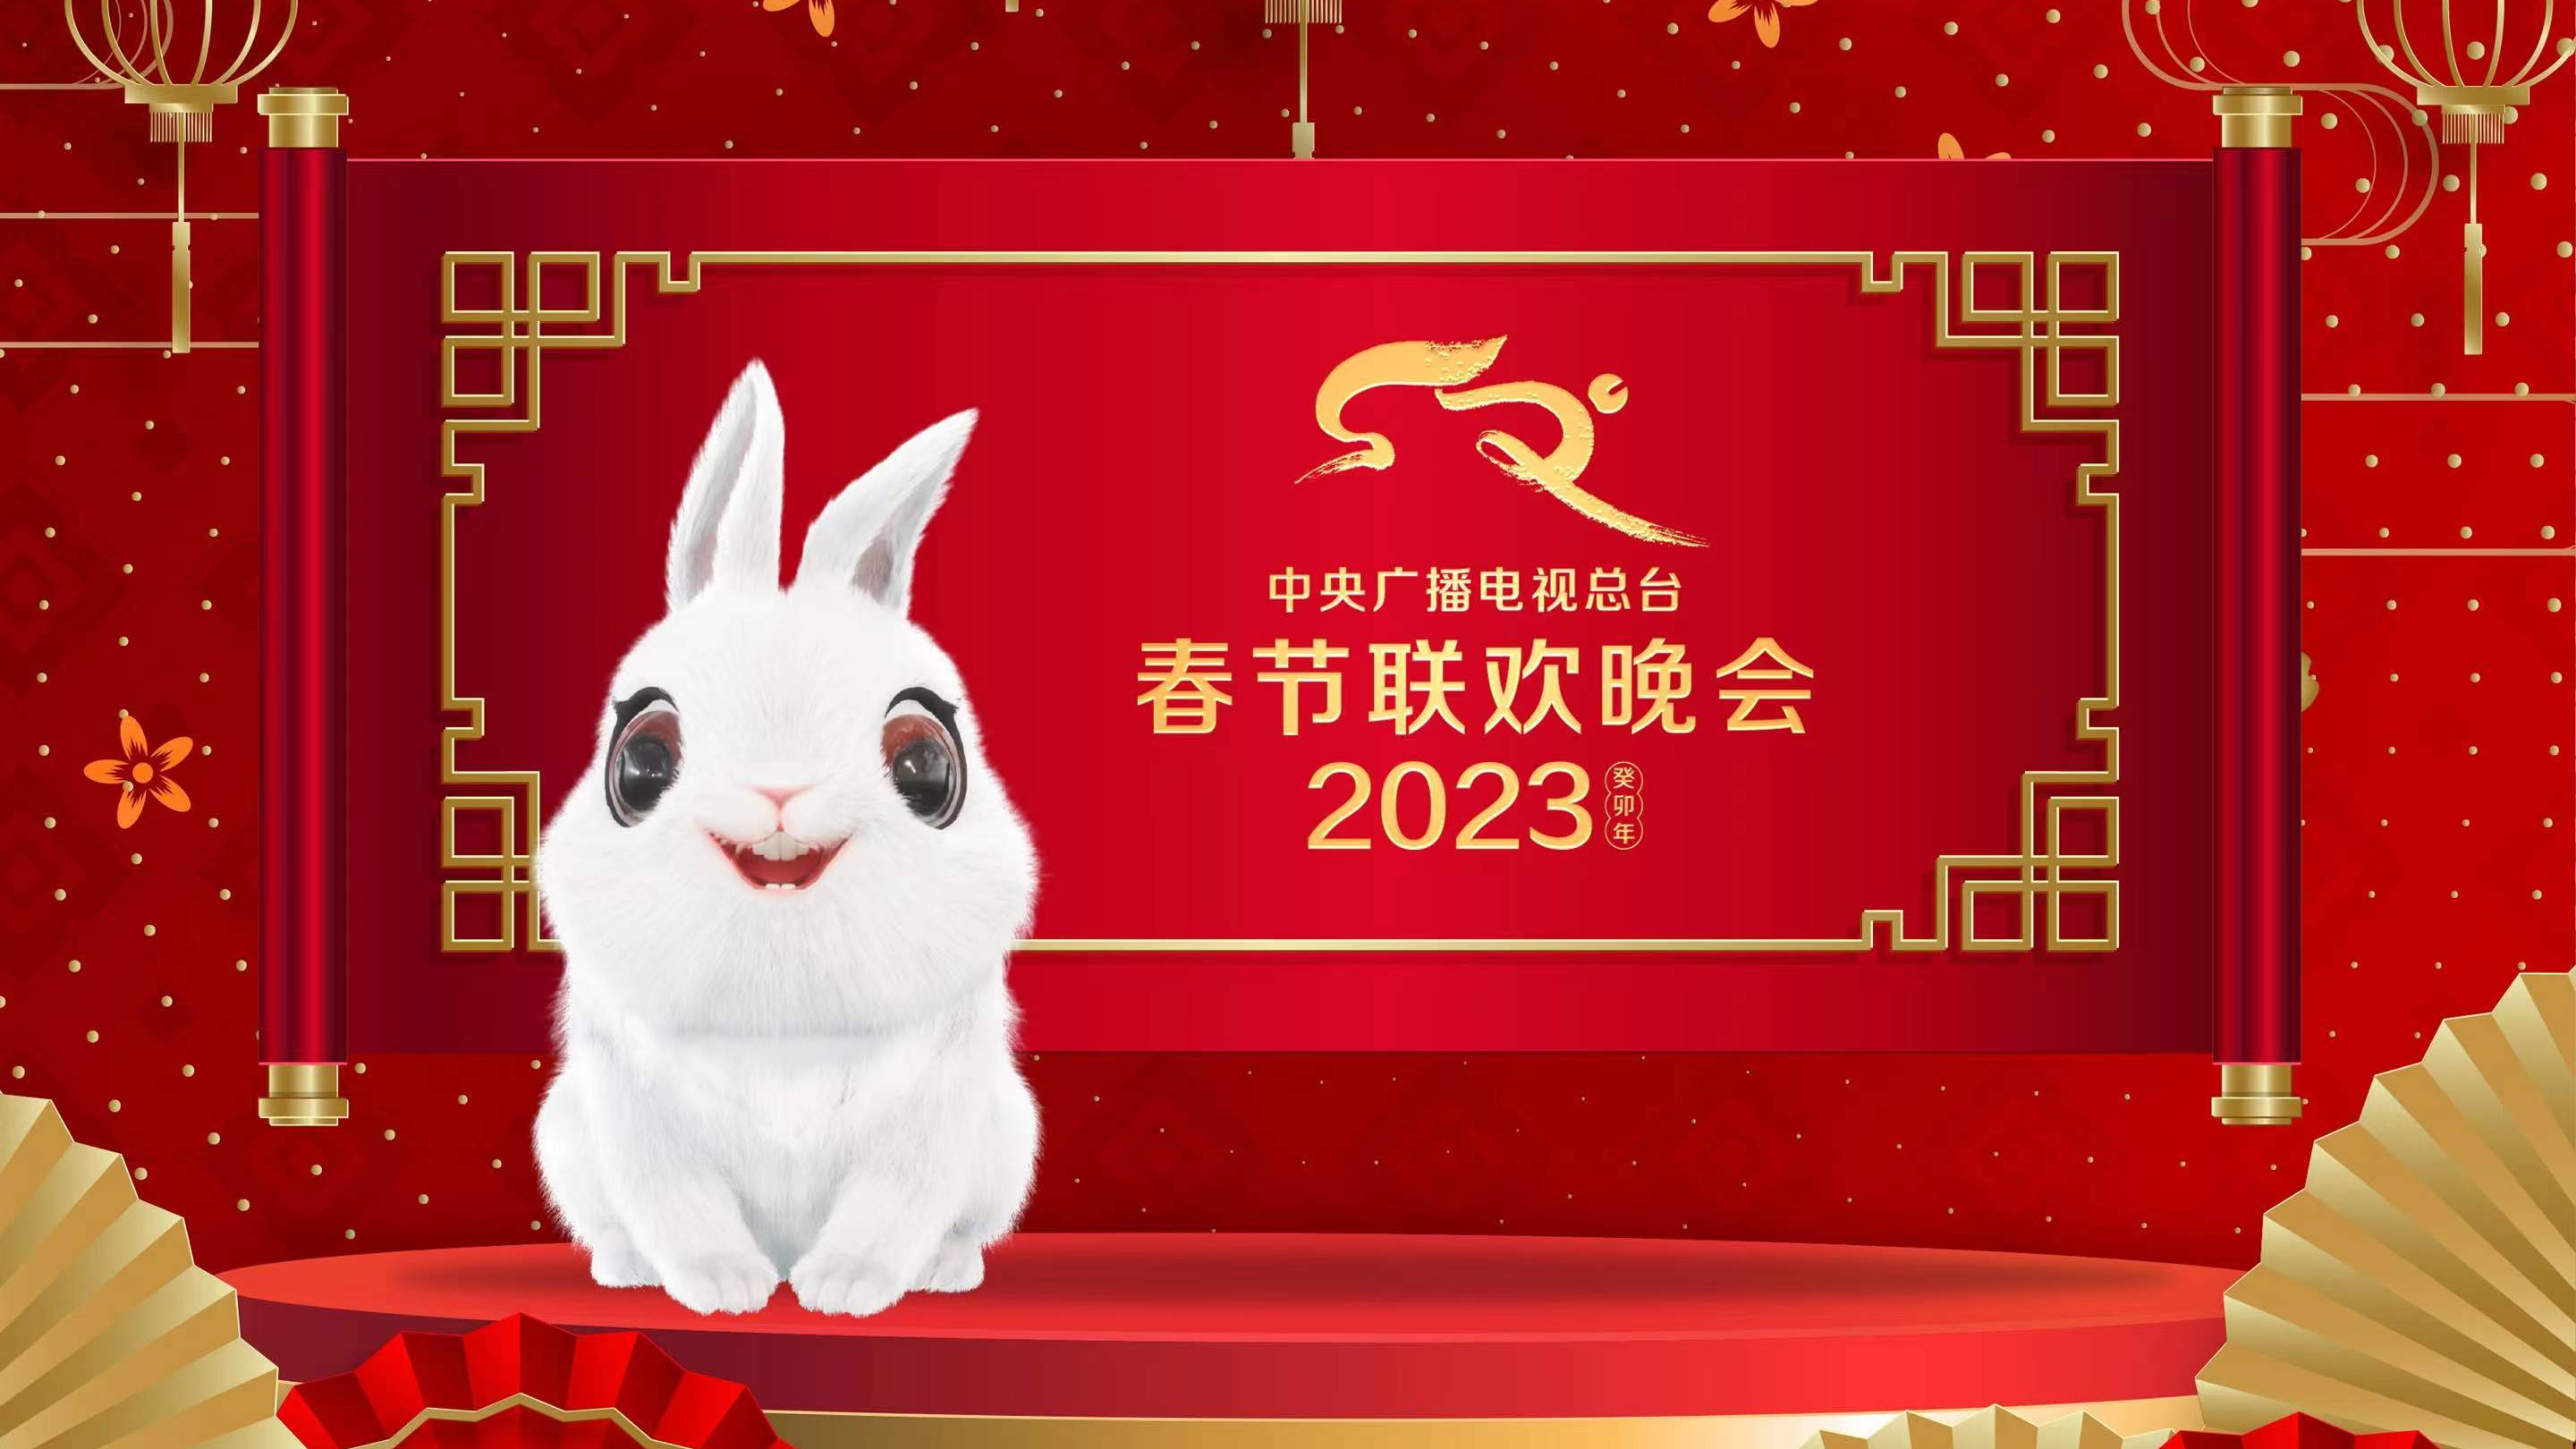 2023 Spring Festival Gala official logo and mascot image 